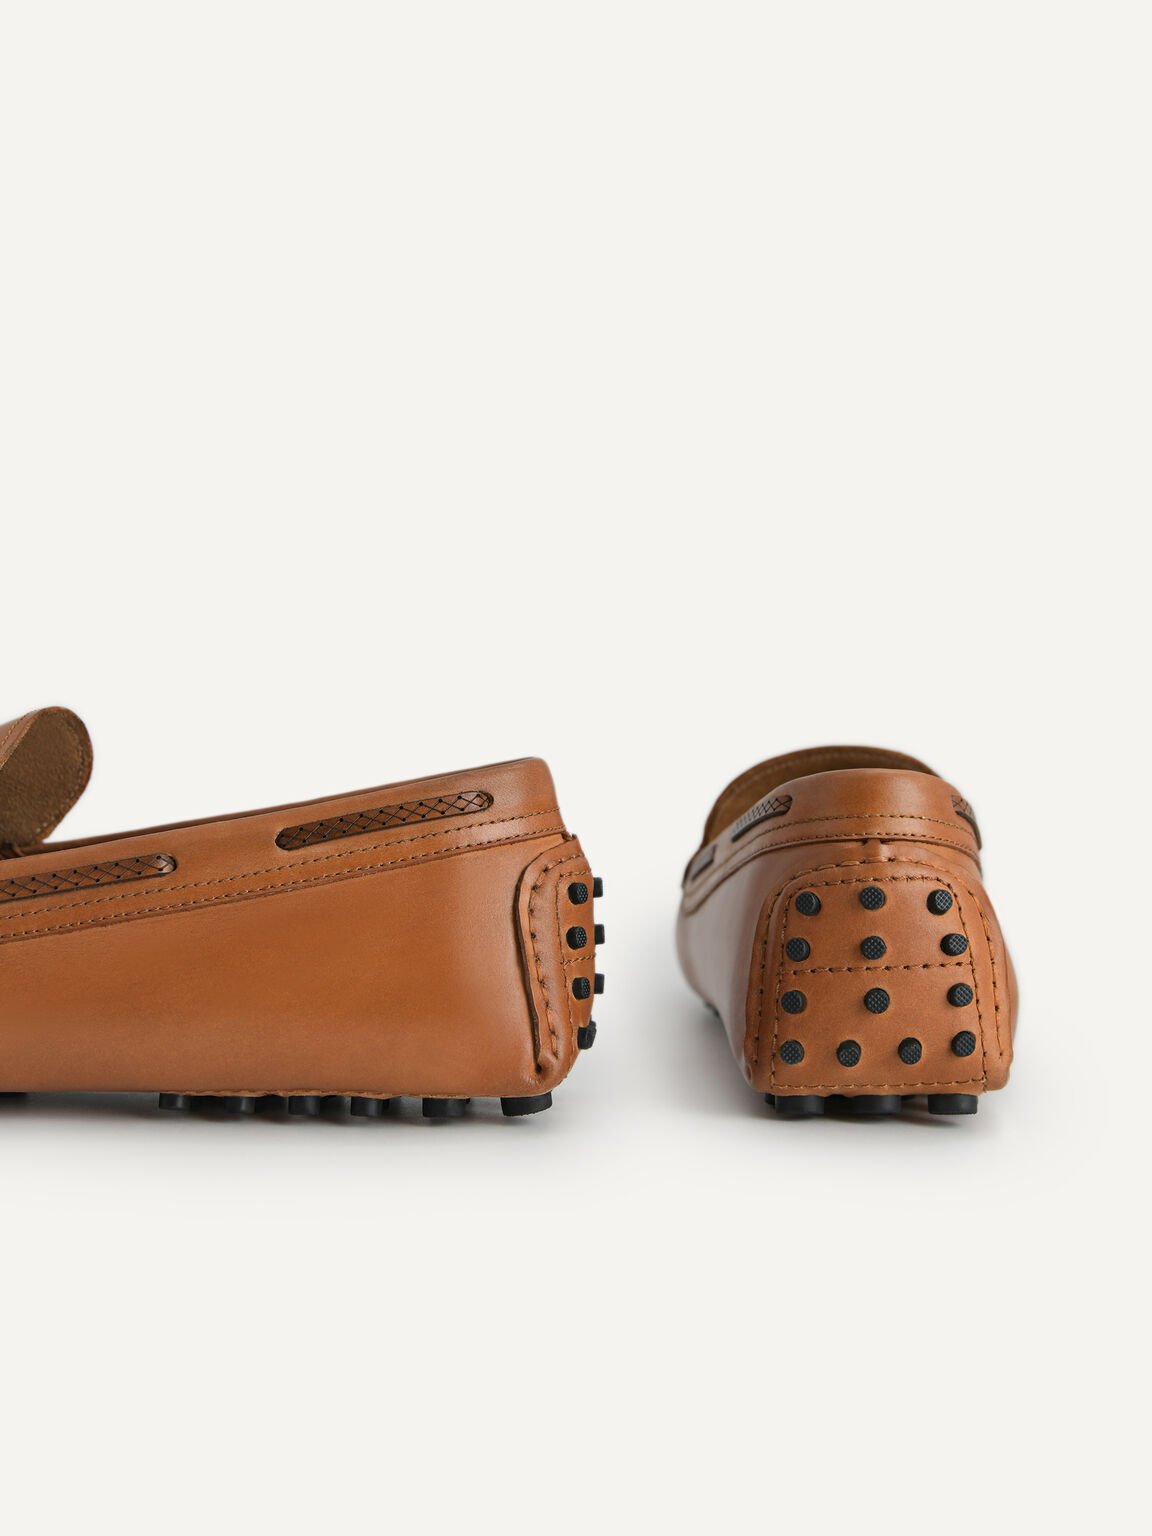 Leather Moccasins with Stitch Detailing, Camel